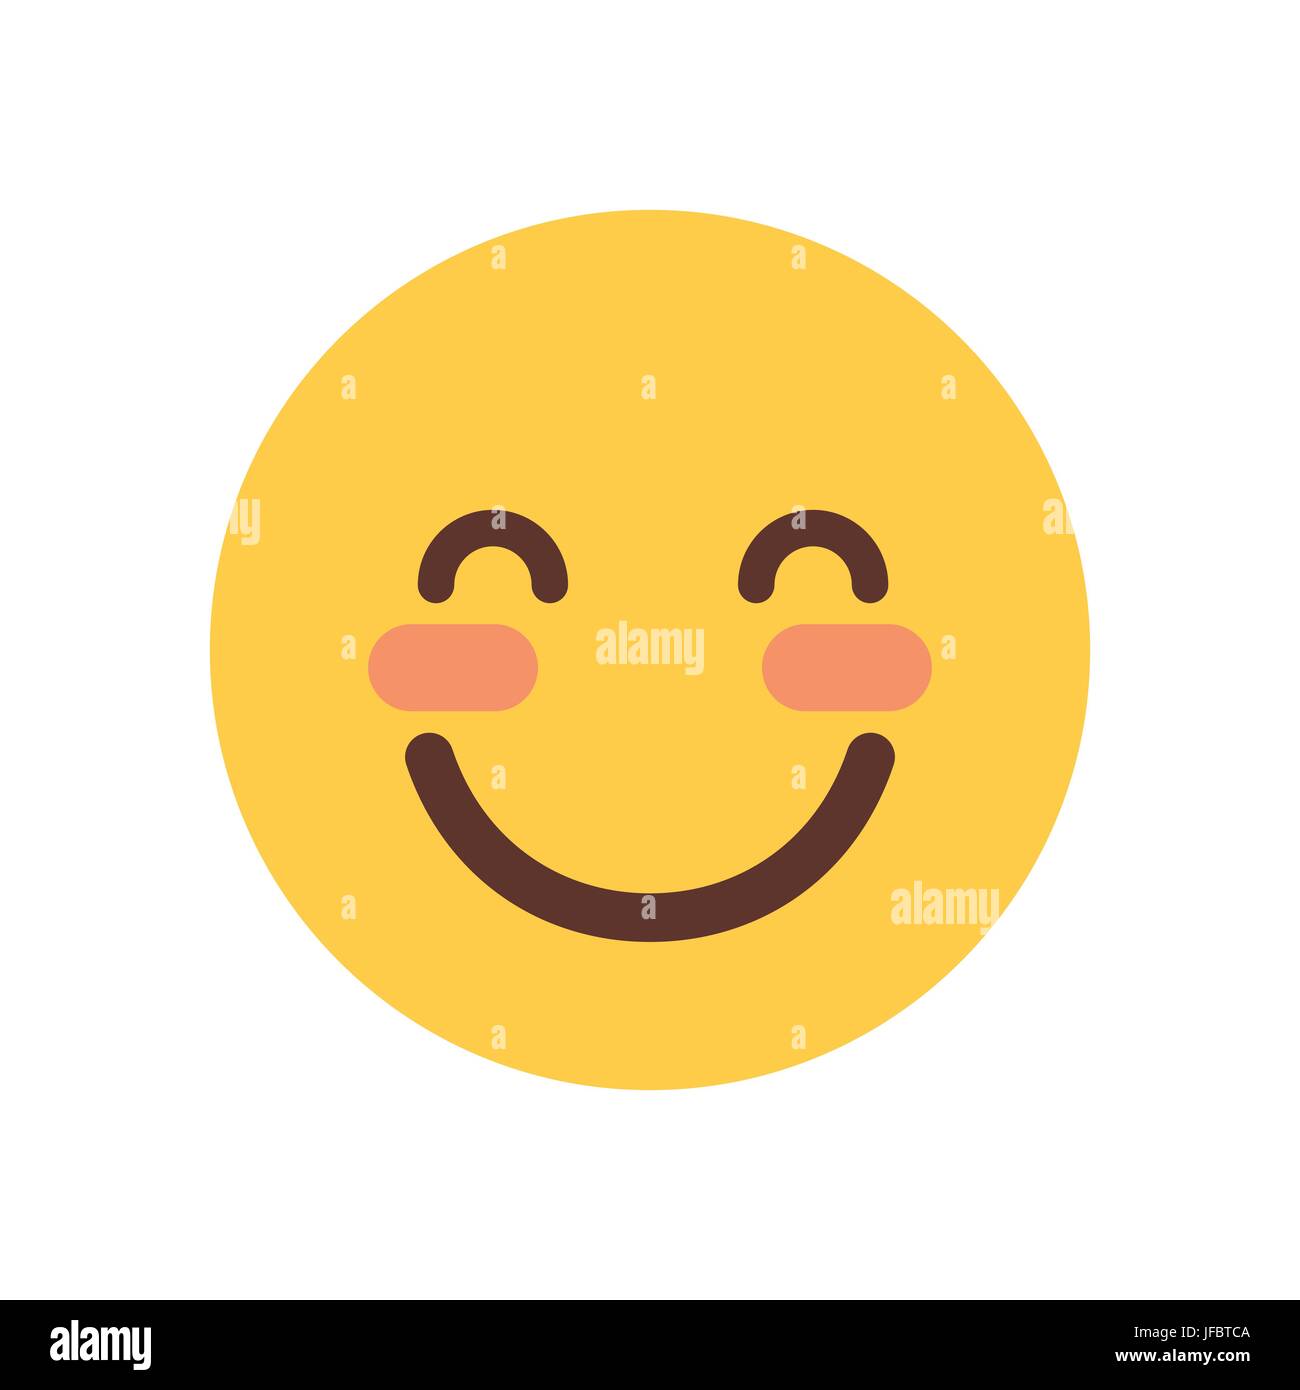 6,064 Shy Emoji Images, Stock Photos, 3D objects, & Vectors